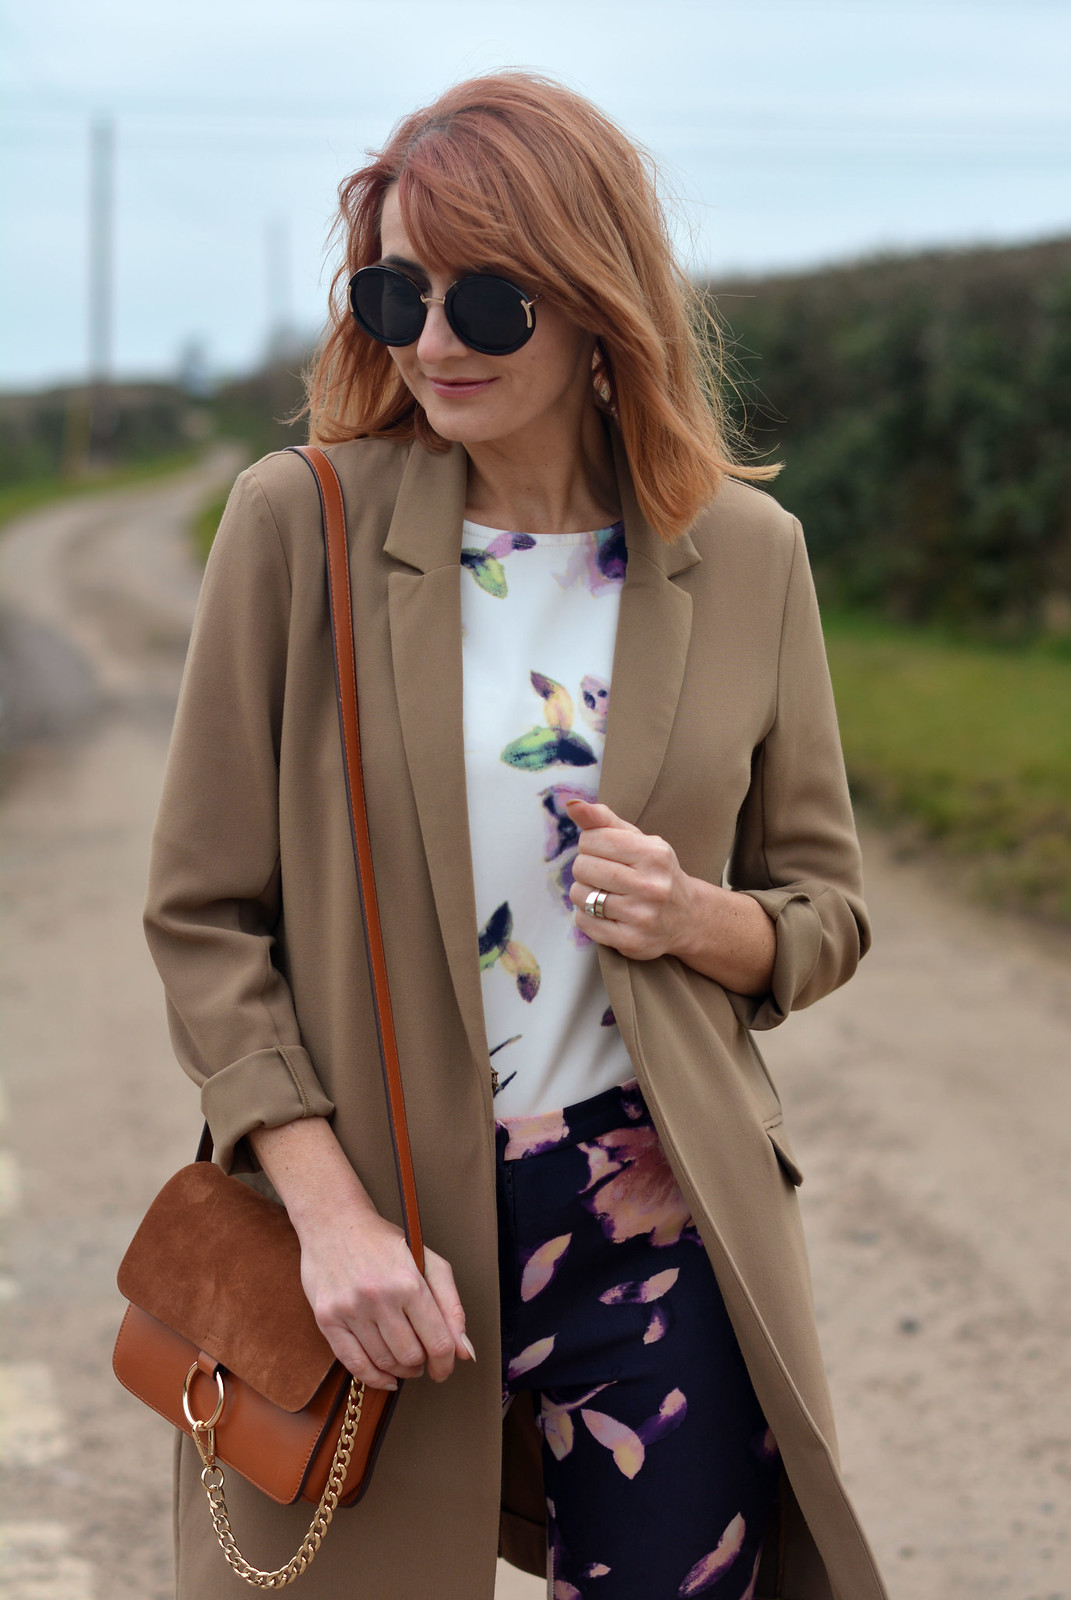 Springtime pattern mixed florals with longline blazer | Not Dressed As Lamb